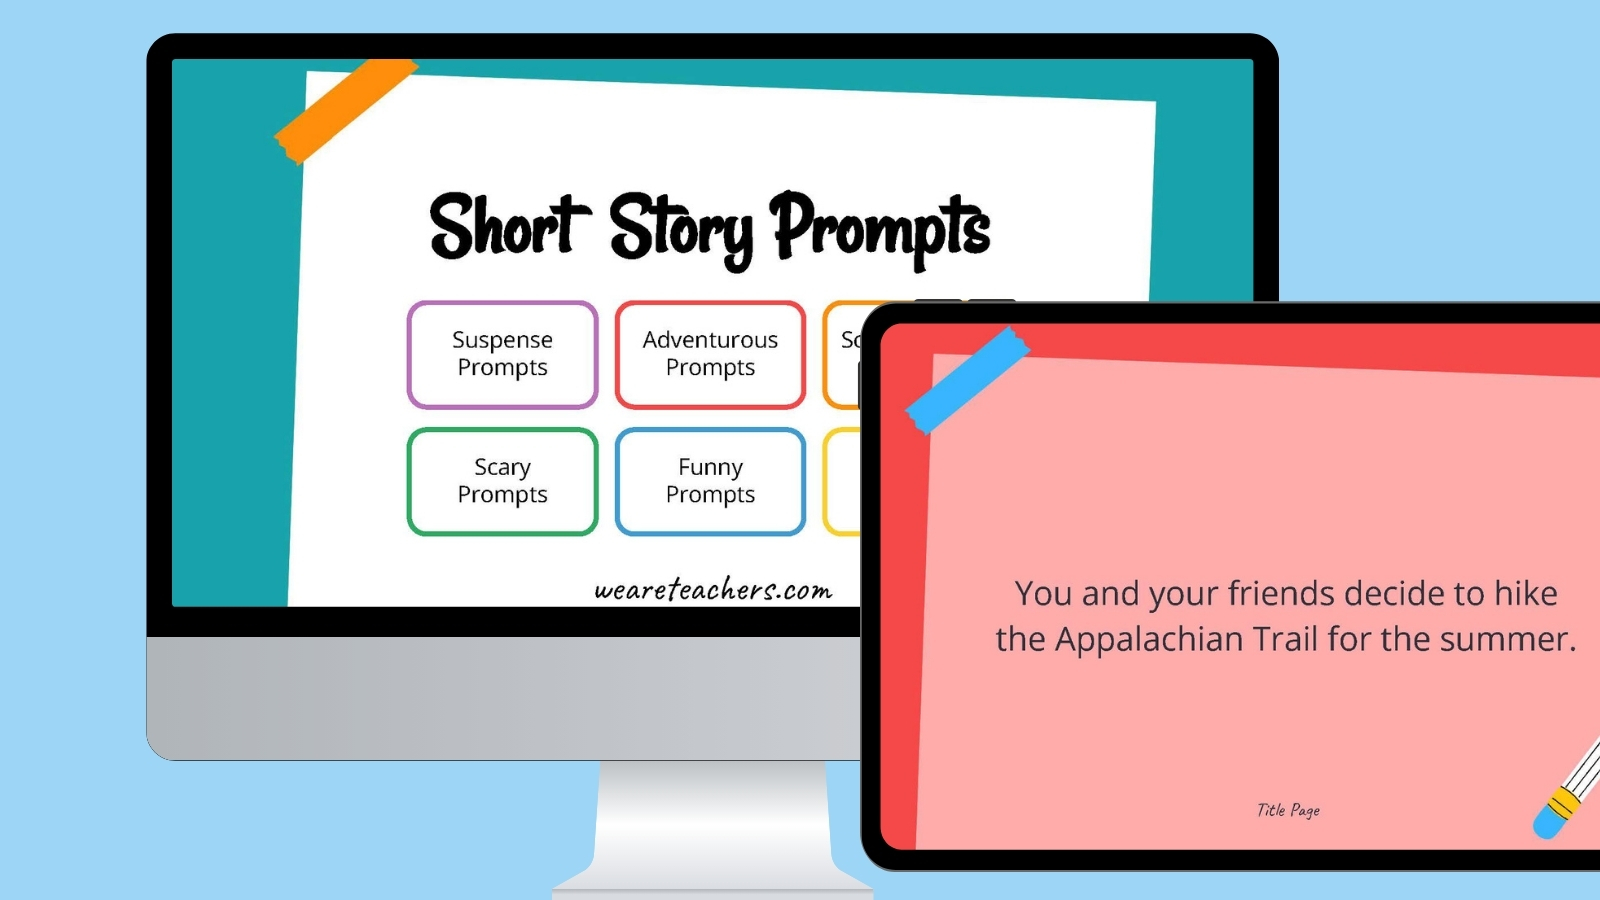 Short Story Ideas To Get Your Students’ Creative Juices Flowing